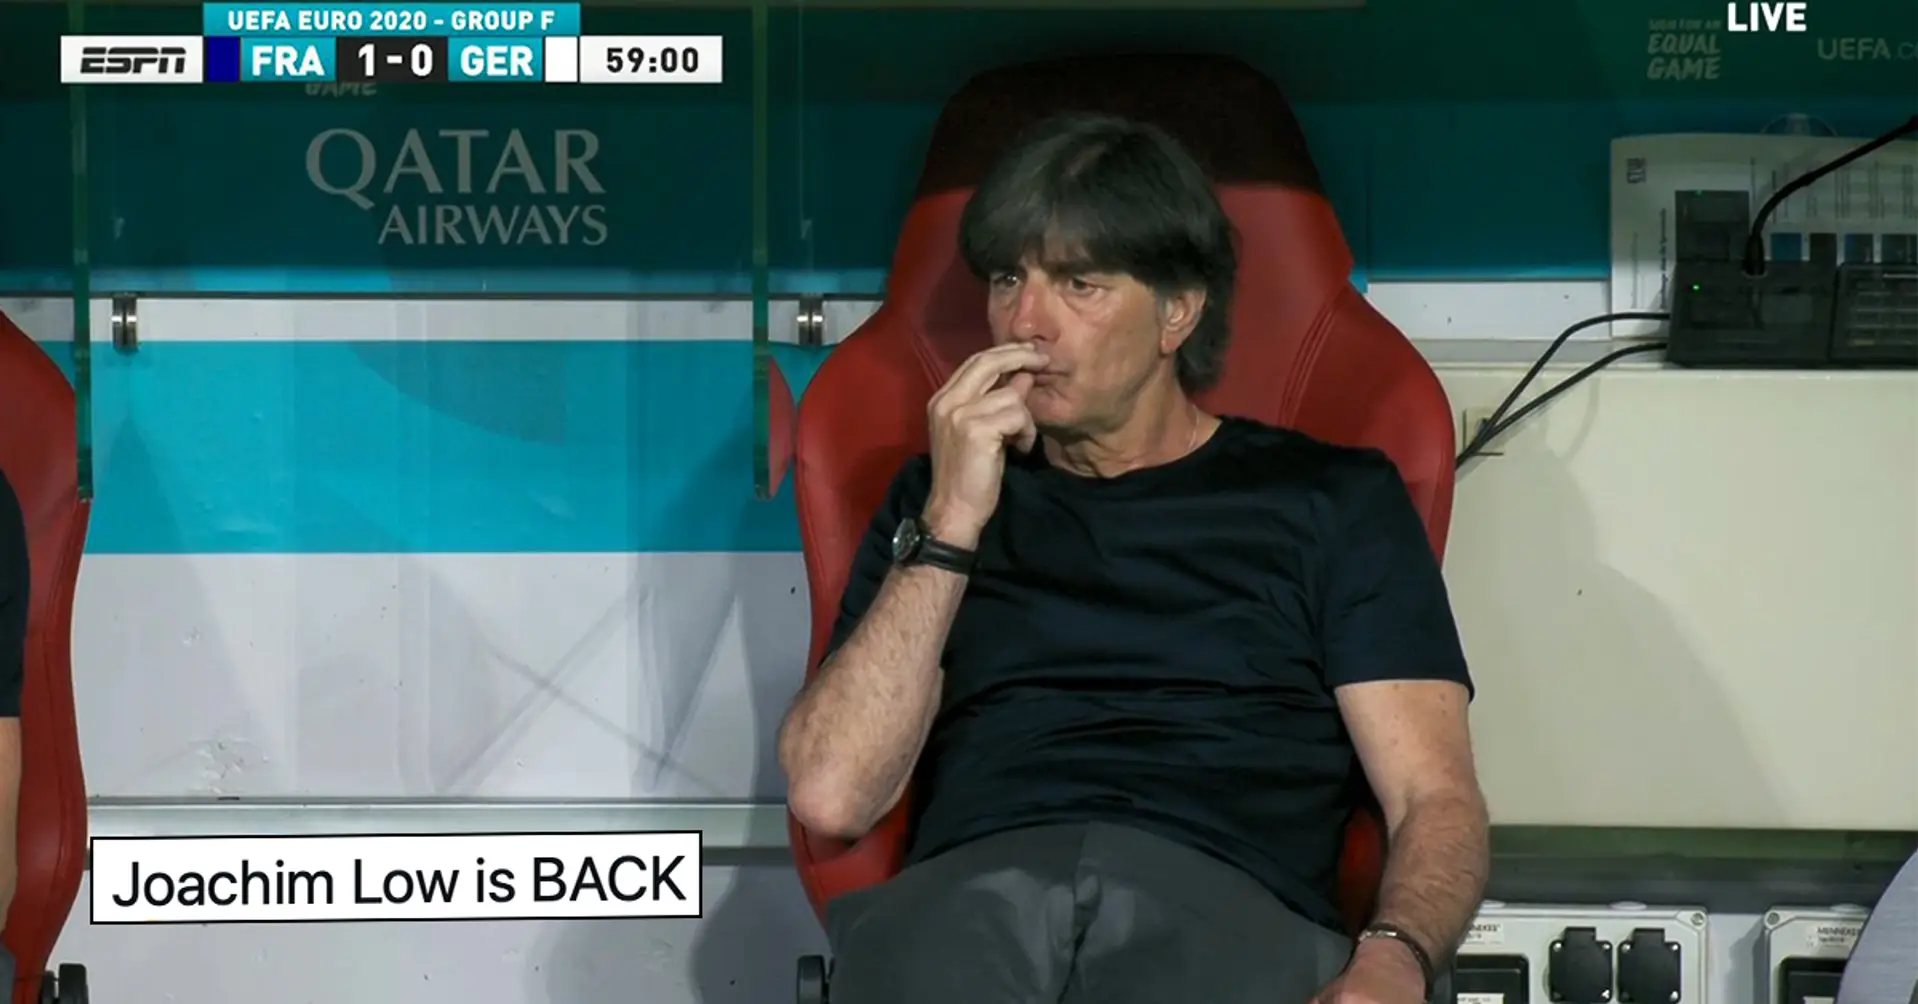 Oh, no. Joachim Low caught on camera sniffing fingers during France–Germany match